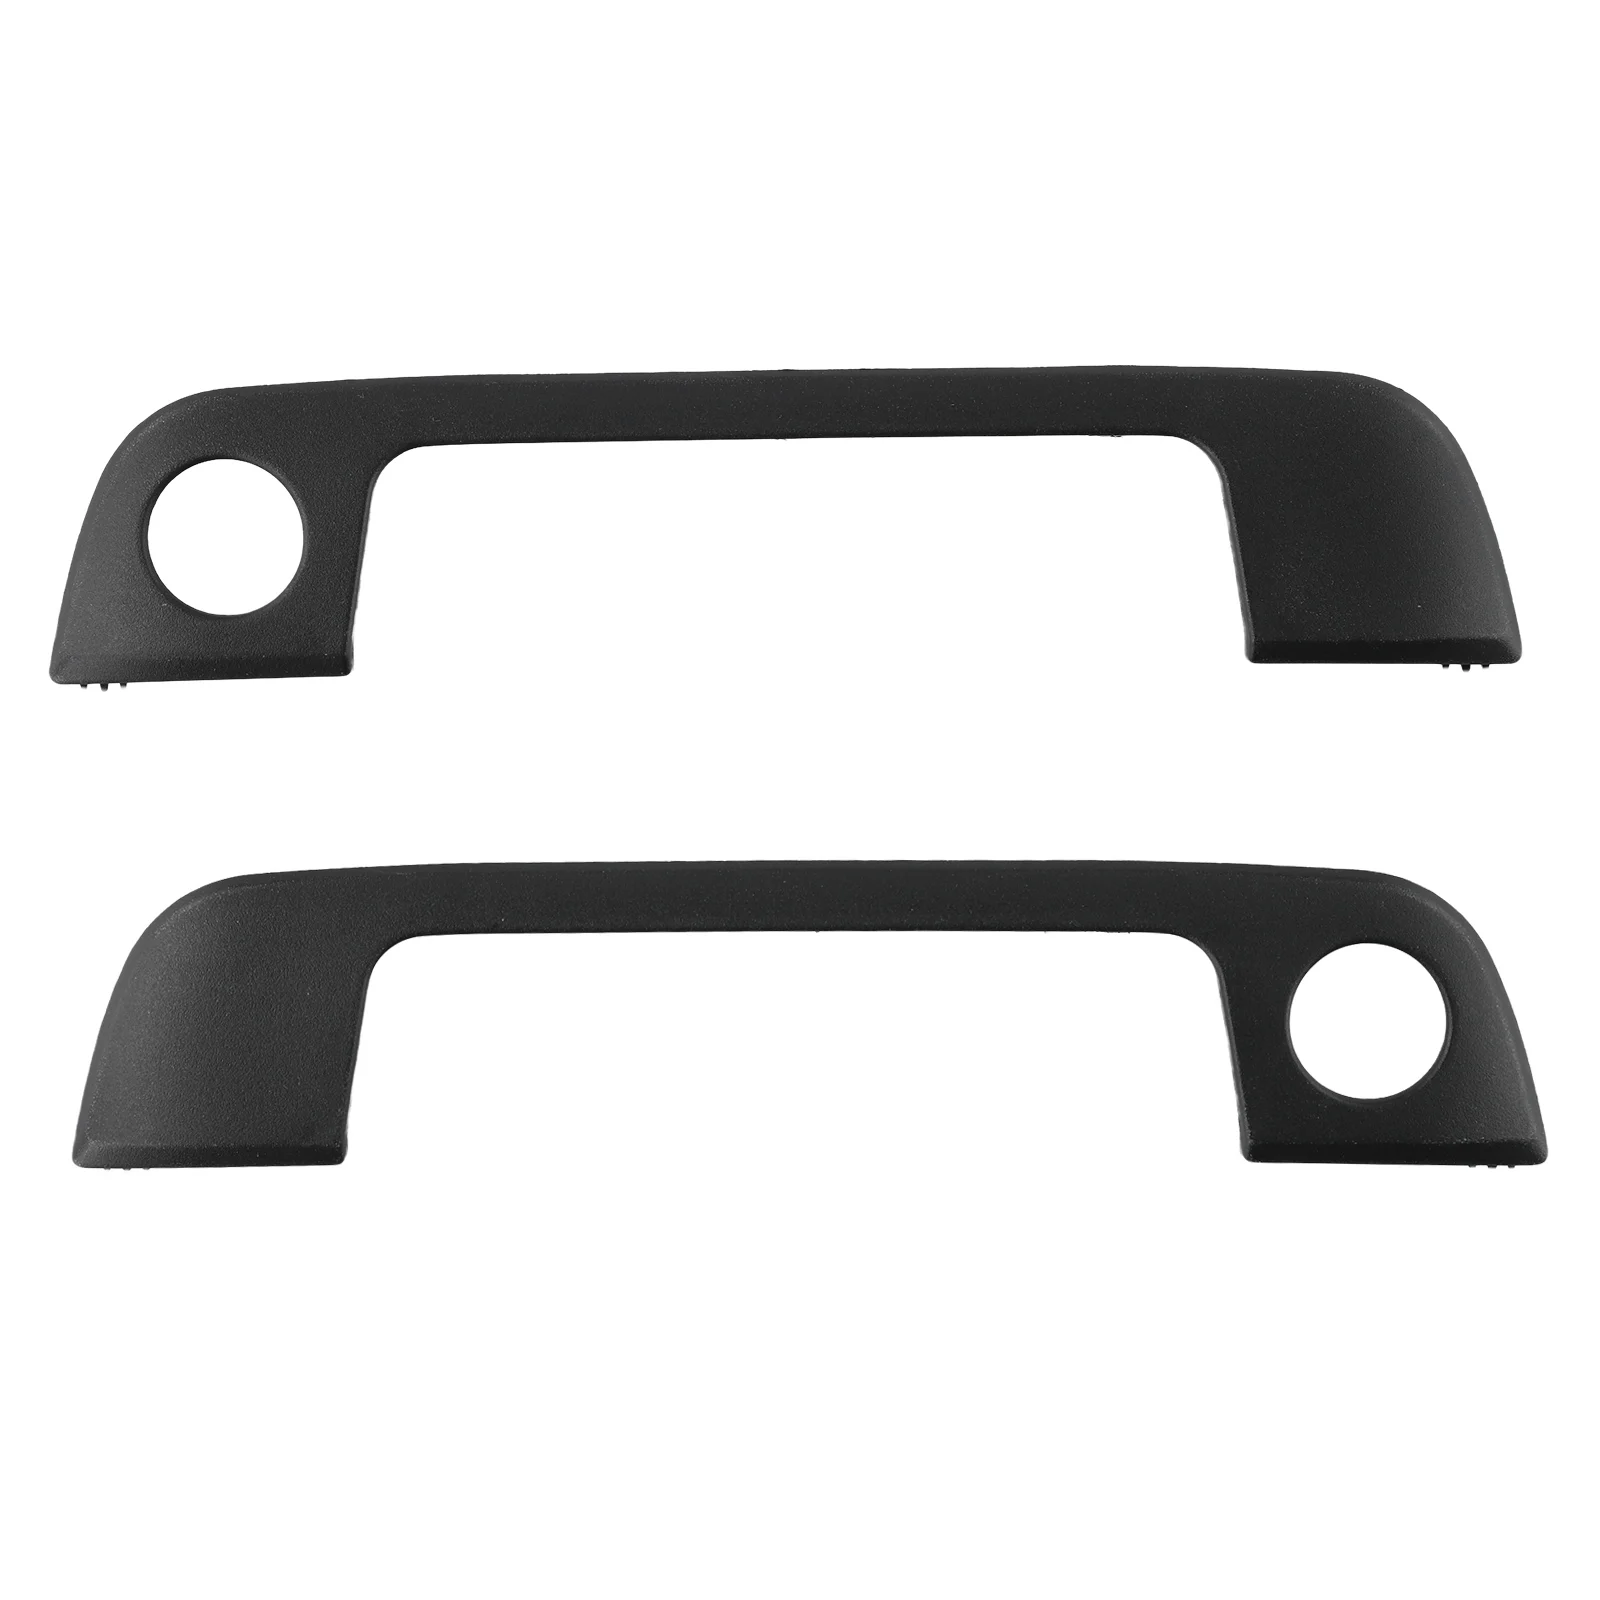 

Parts Door Handle Cover For BMW E32 7-Series 1986-94 For BMW E34 5-Series 1988-96 For BMW E36 3-Series 1992-99